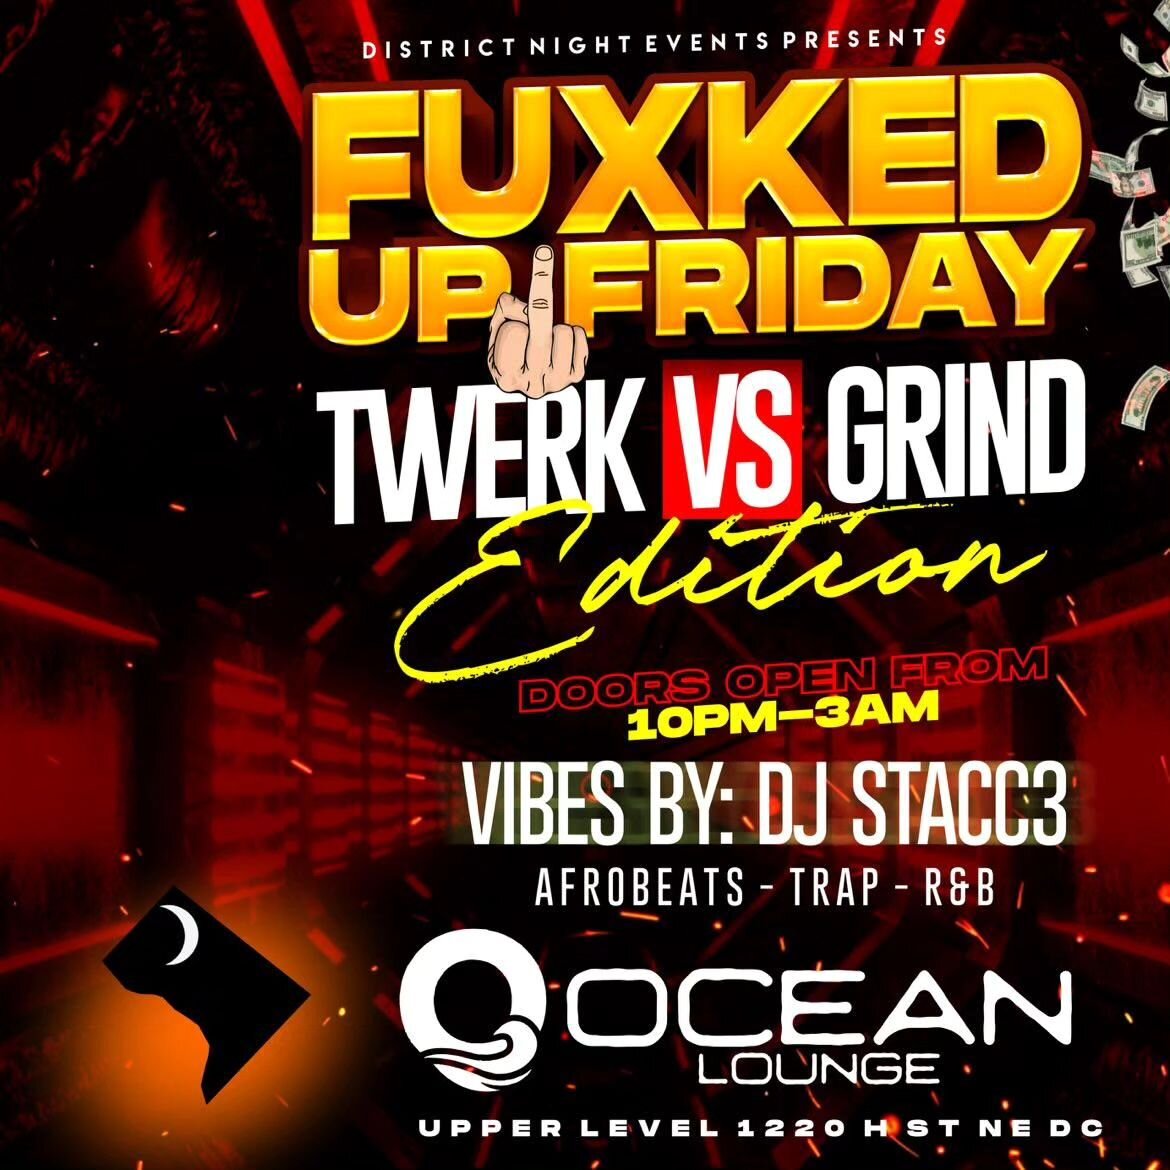 District Night Events Fuxked Up Fridays &quot;Twerk vs Grind&quot; Edition. AfroBeats - Trap -R&amp;B all night! Best Drink Specials in the city at @theoceanloungedc 1220 H St NE. Every Friday!